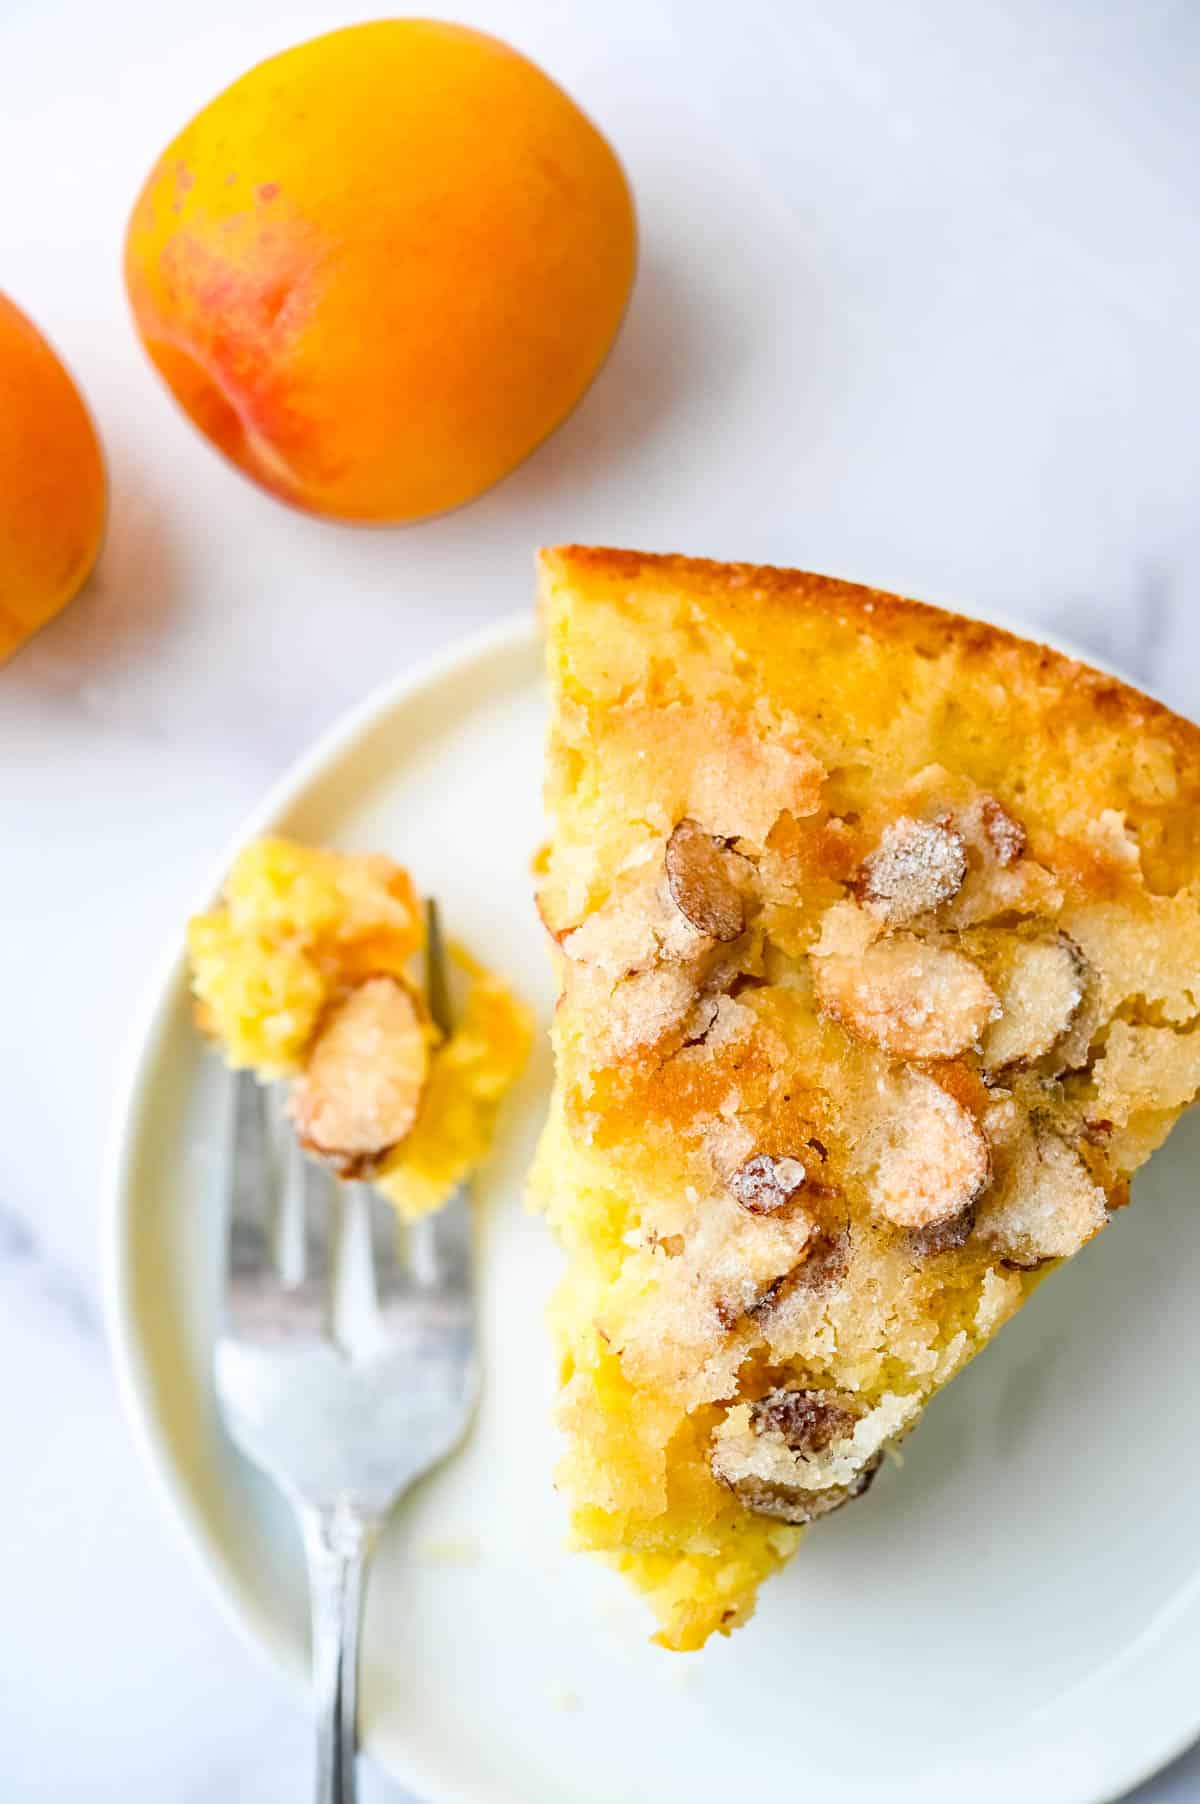 A slice of the apricot cake with sugared almonds on top.